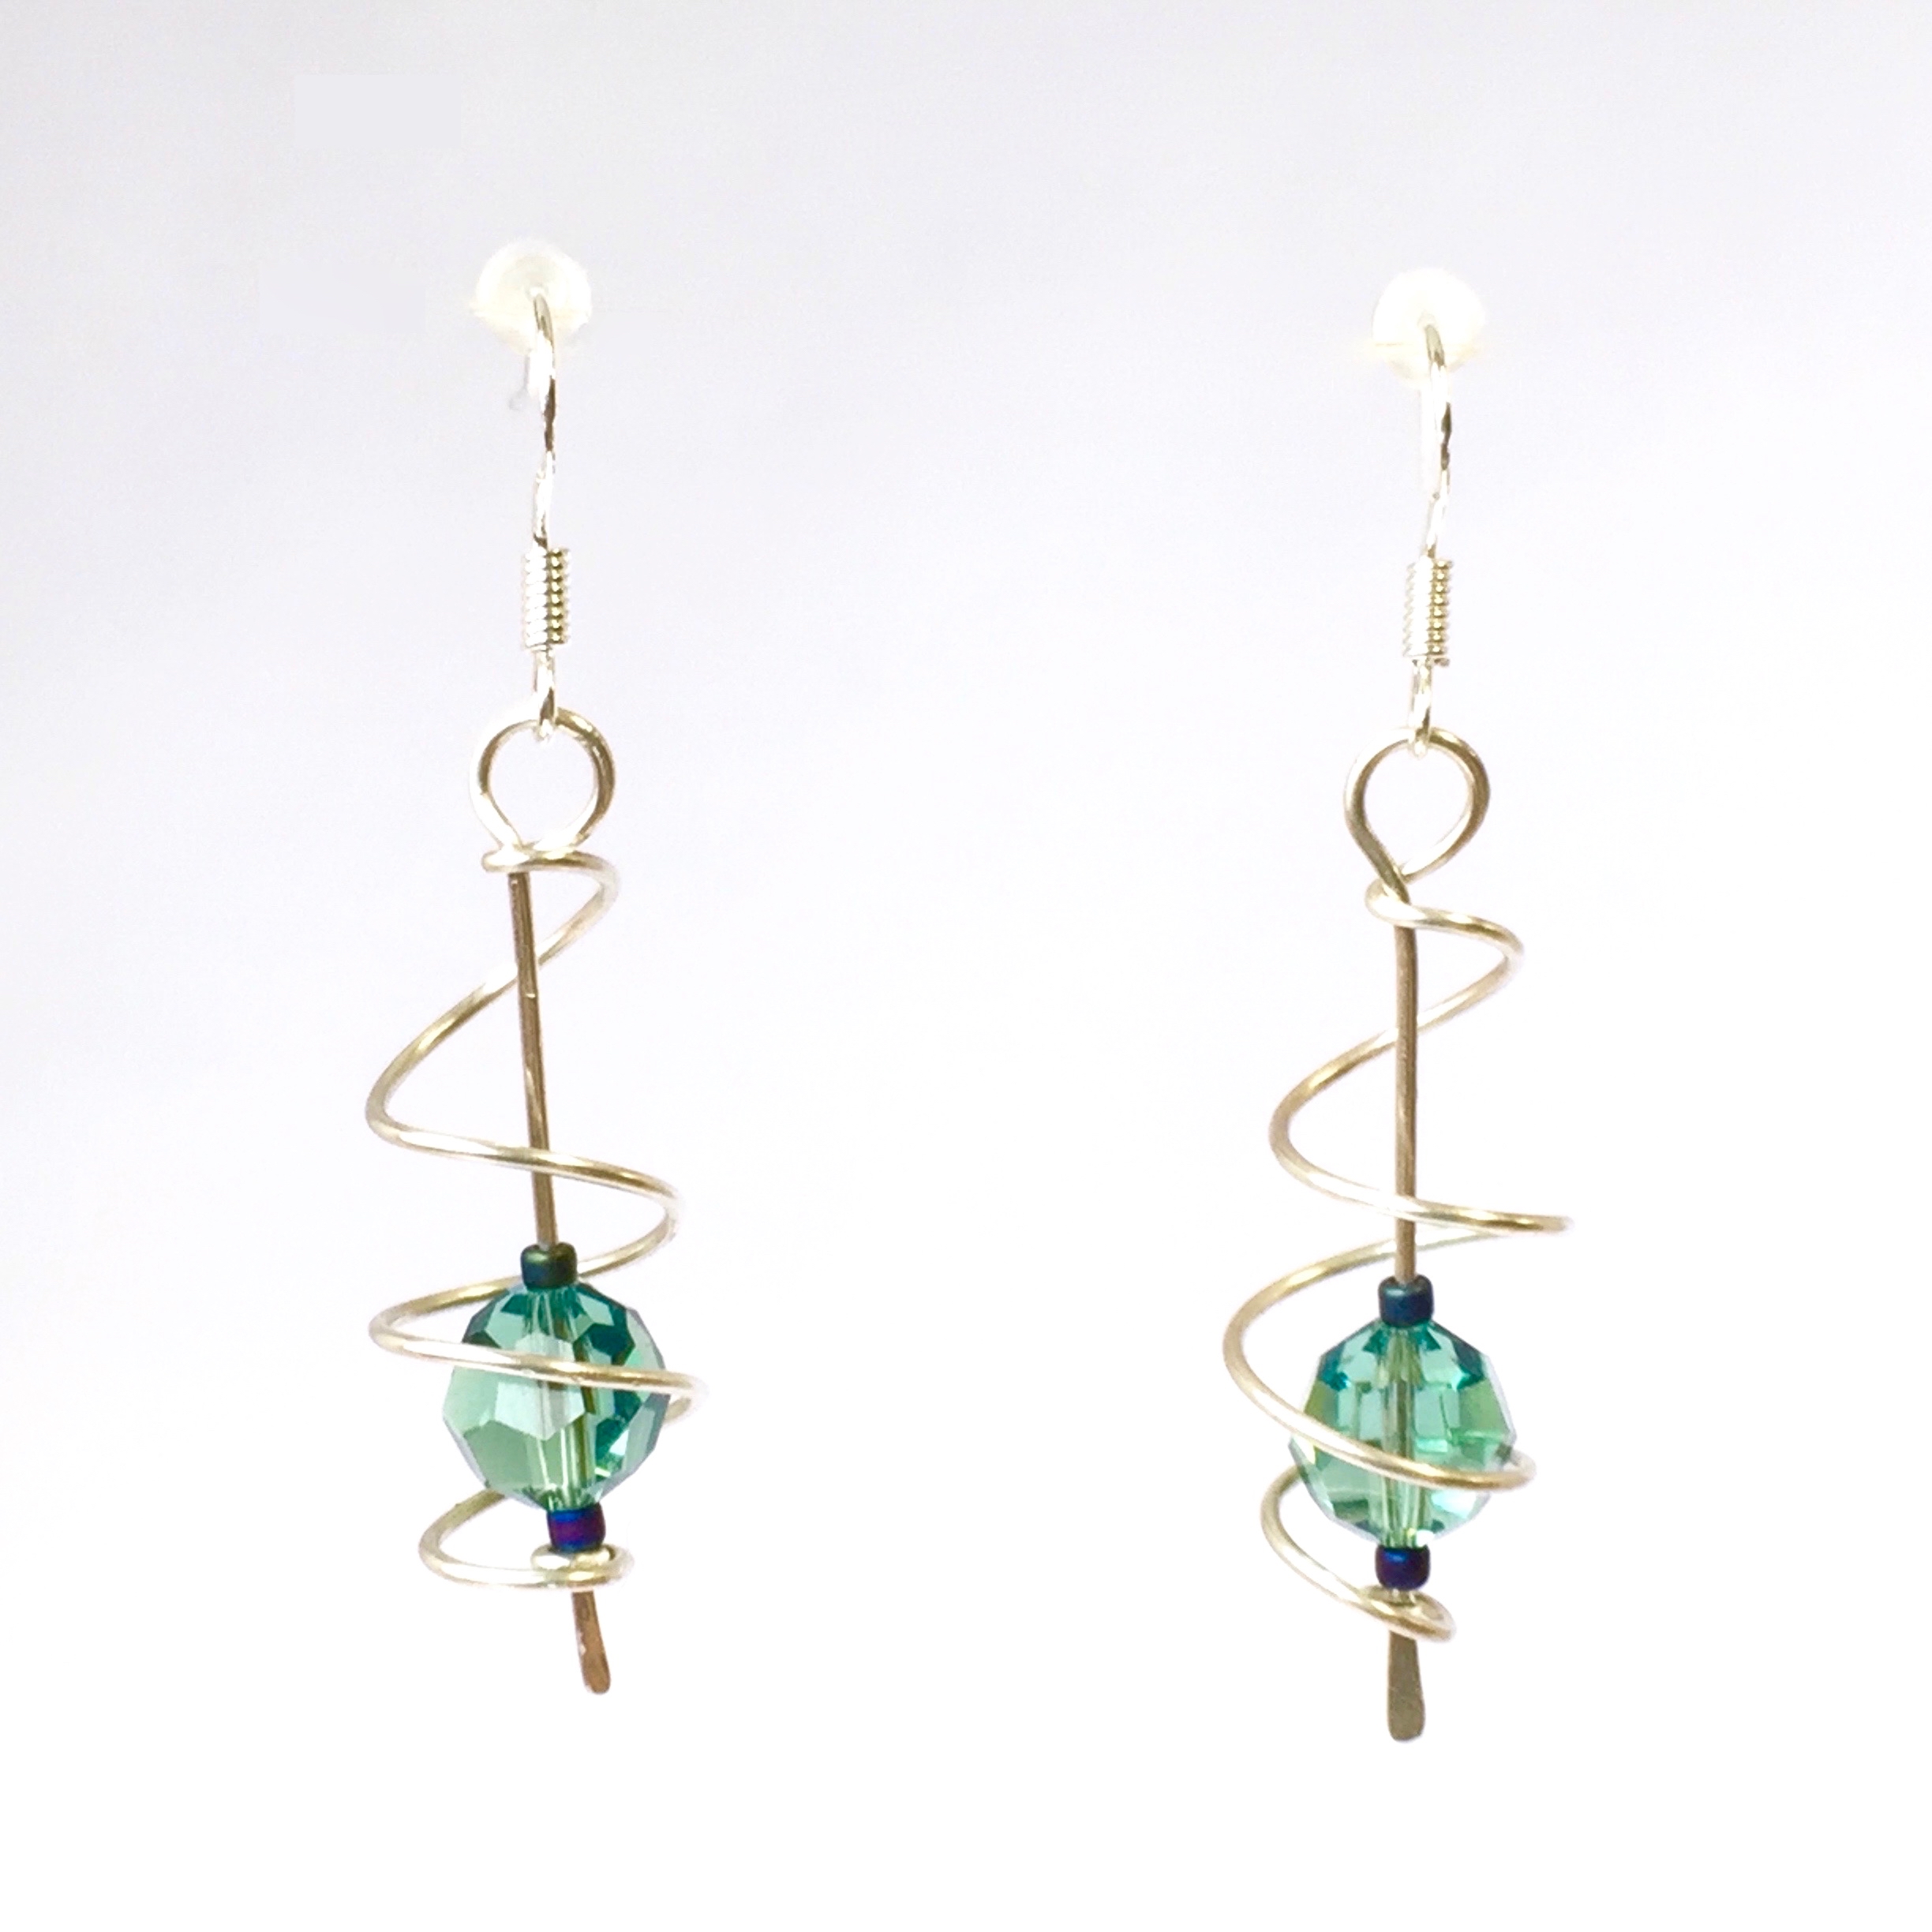 Open Spiral Cage Earrings with pale green Erinite Swarovski Crystals